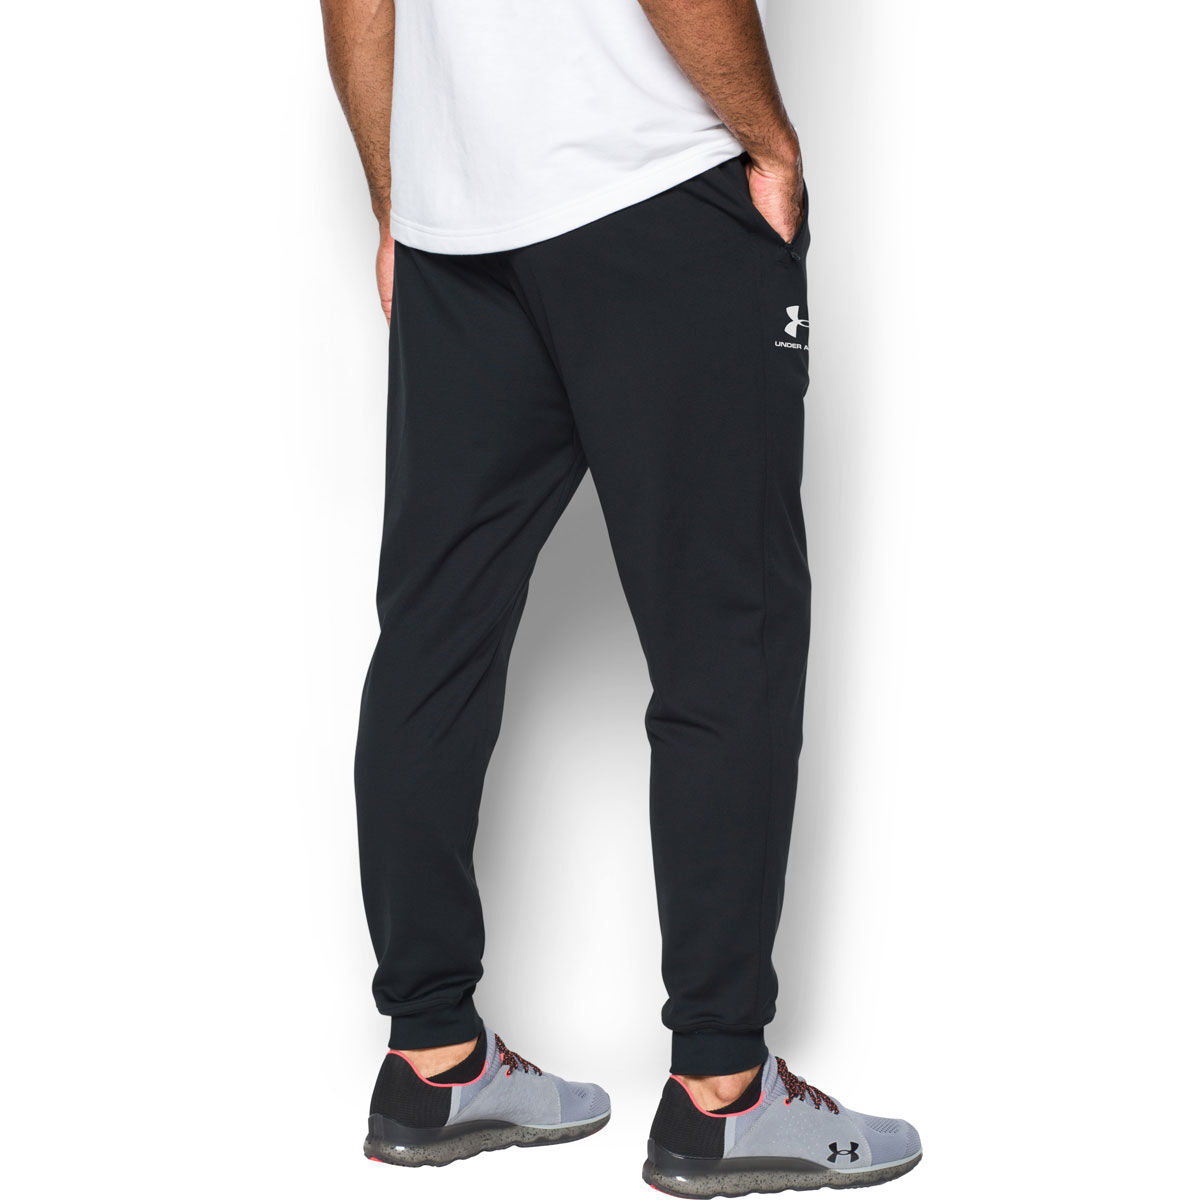 Under Armour Solid Black Track Pants Size X-Large (Youth) - 46% off